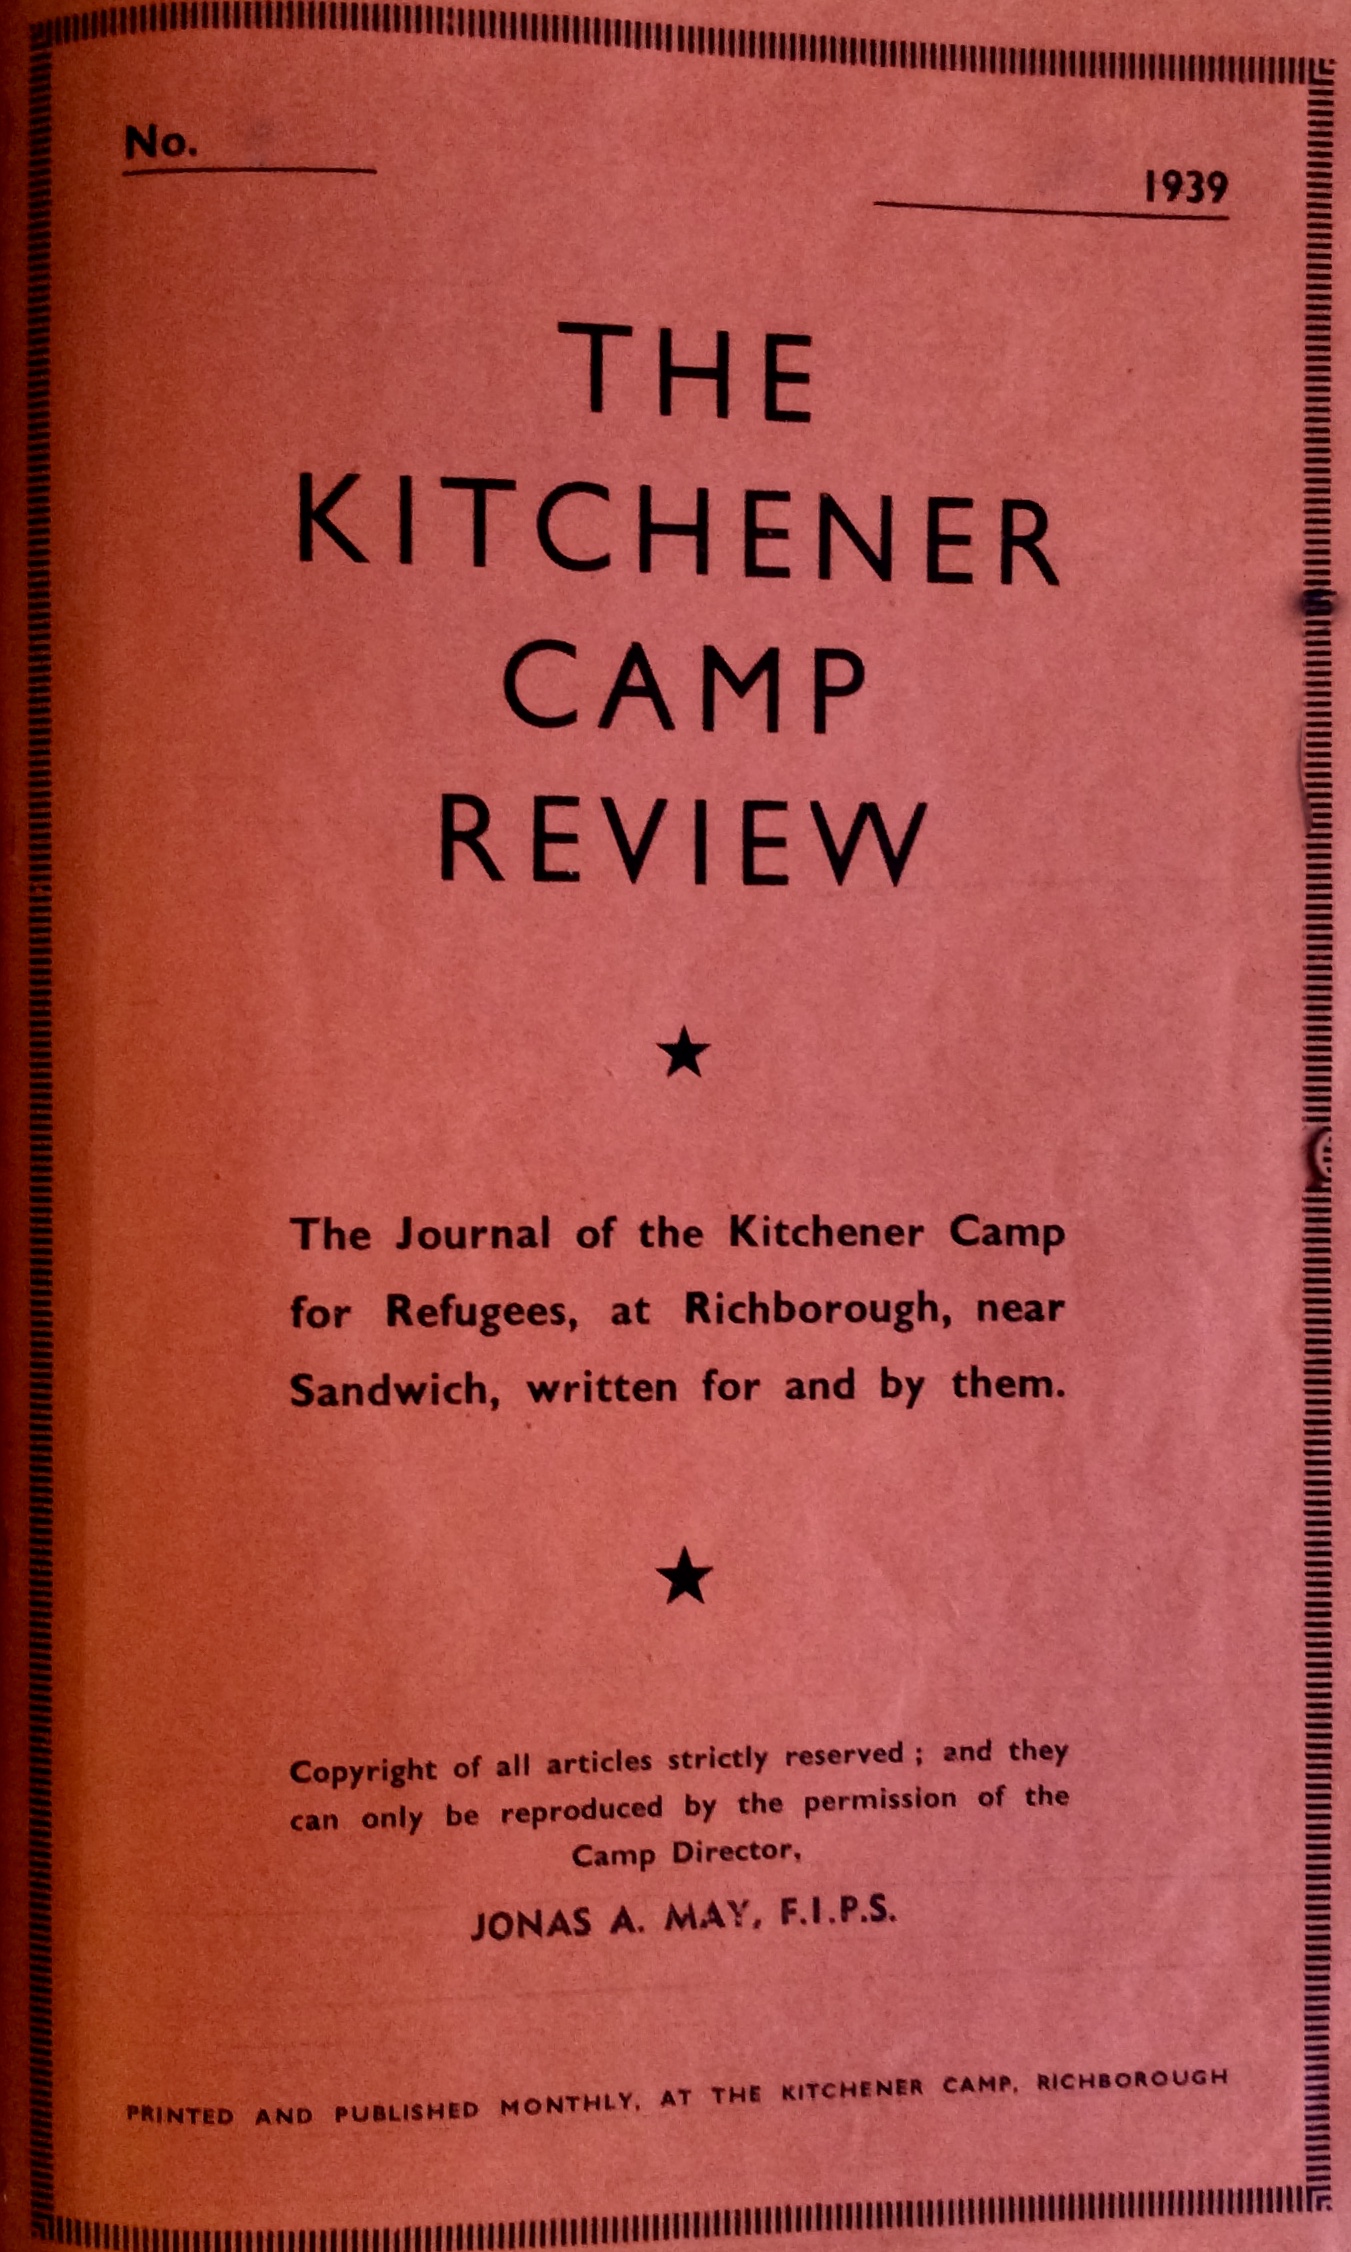 Kitchener Camp Review, Cover